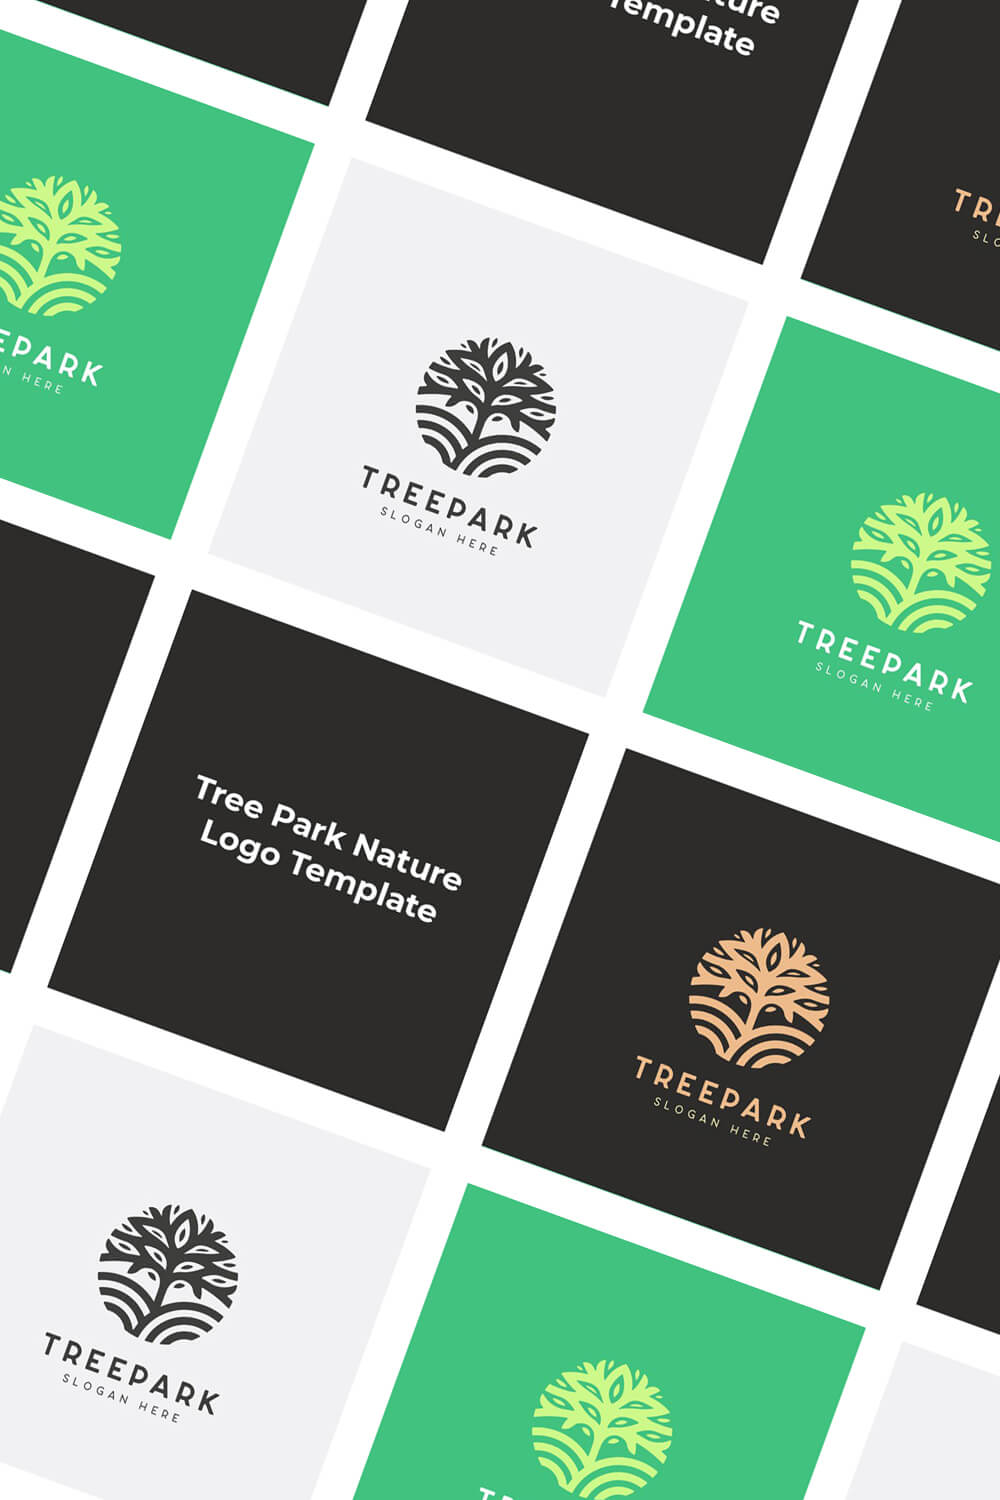 Diagonal image with small pictures of treepark nature logo.